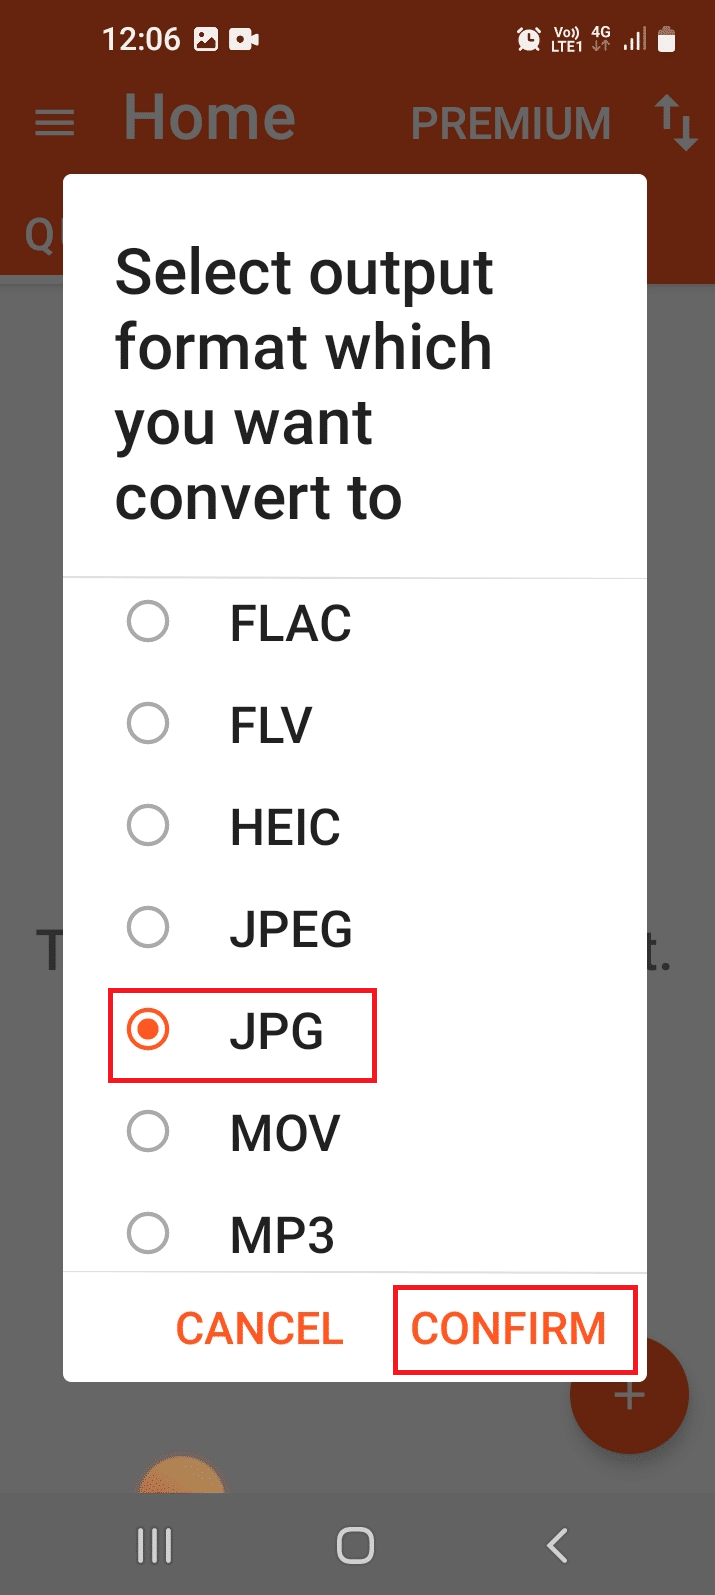 Tap on the JPG option in the list and tap on the CONFIRM option